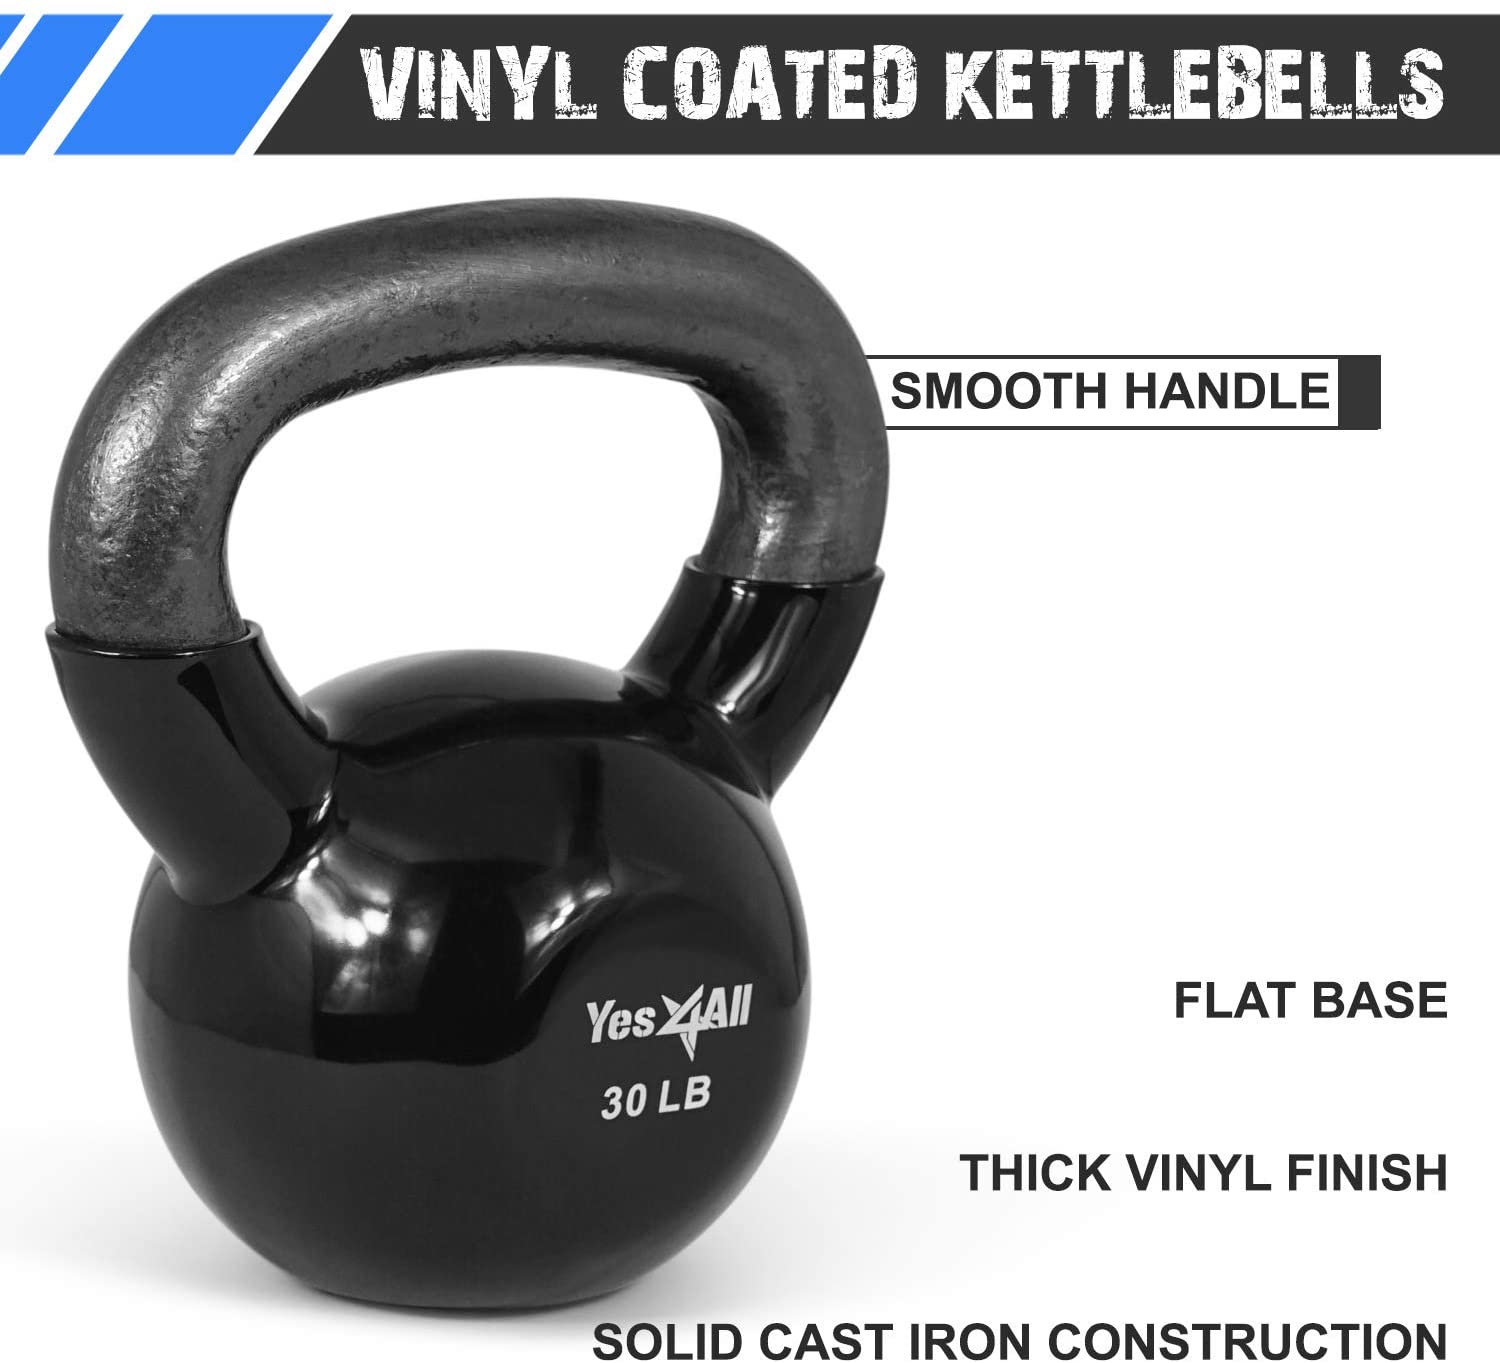 Yes4All 60 lb Vinyl Coated / PVC Kettlebell, Black, Combo / Set, Includes 15-25lb - image 5 of 8